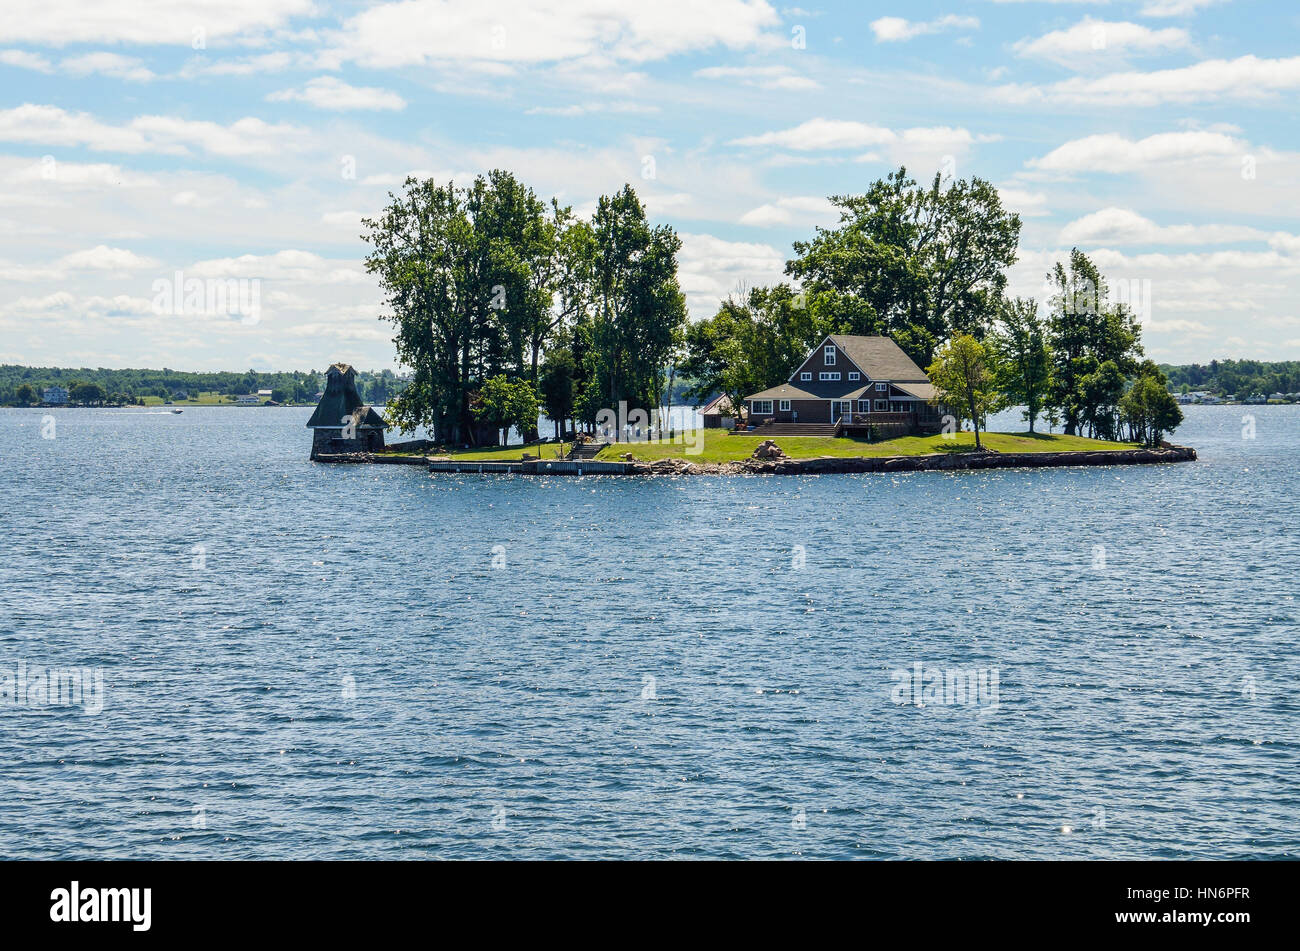 Kingston, Canada - July 24, 2014: Saint Lawrence river in the Thousand Islands on the Canadian side of the archipelago Stock Photo